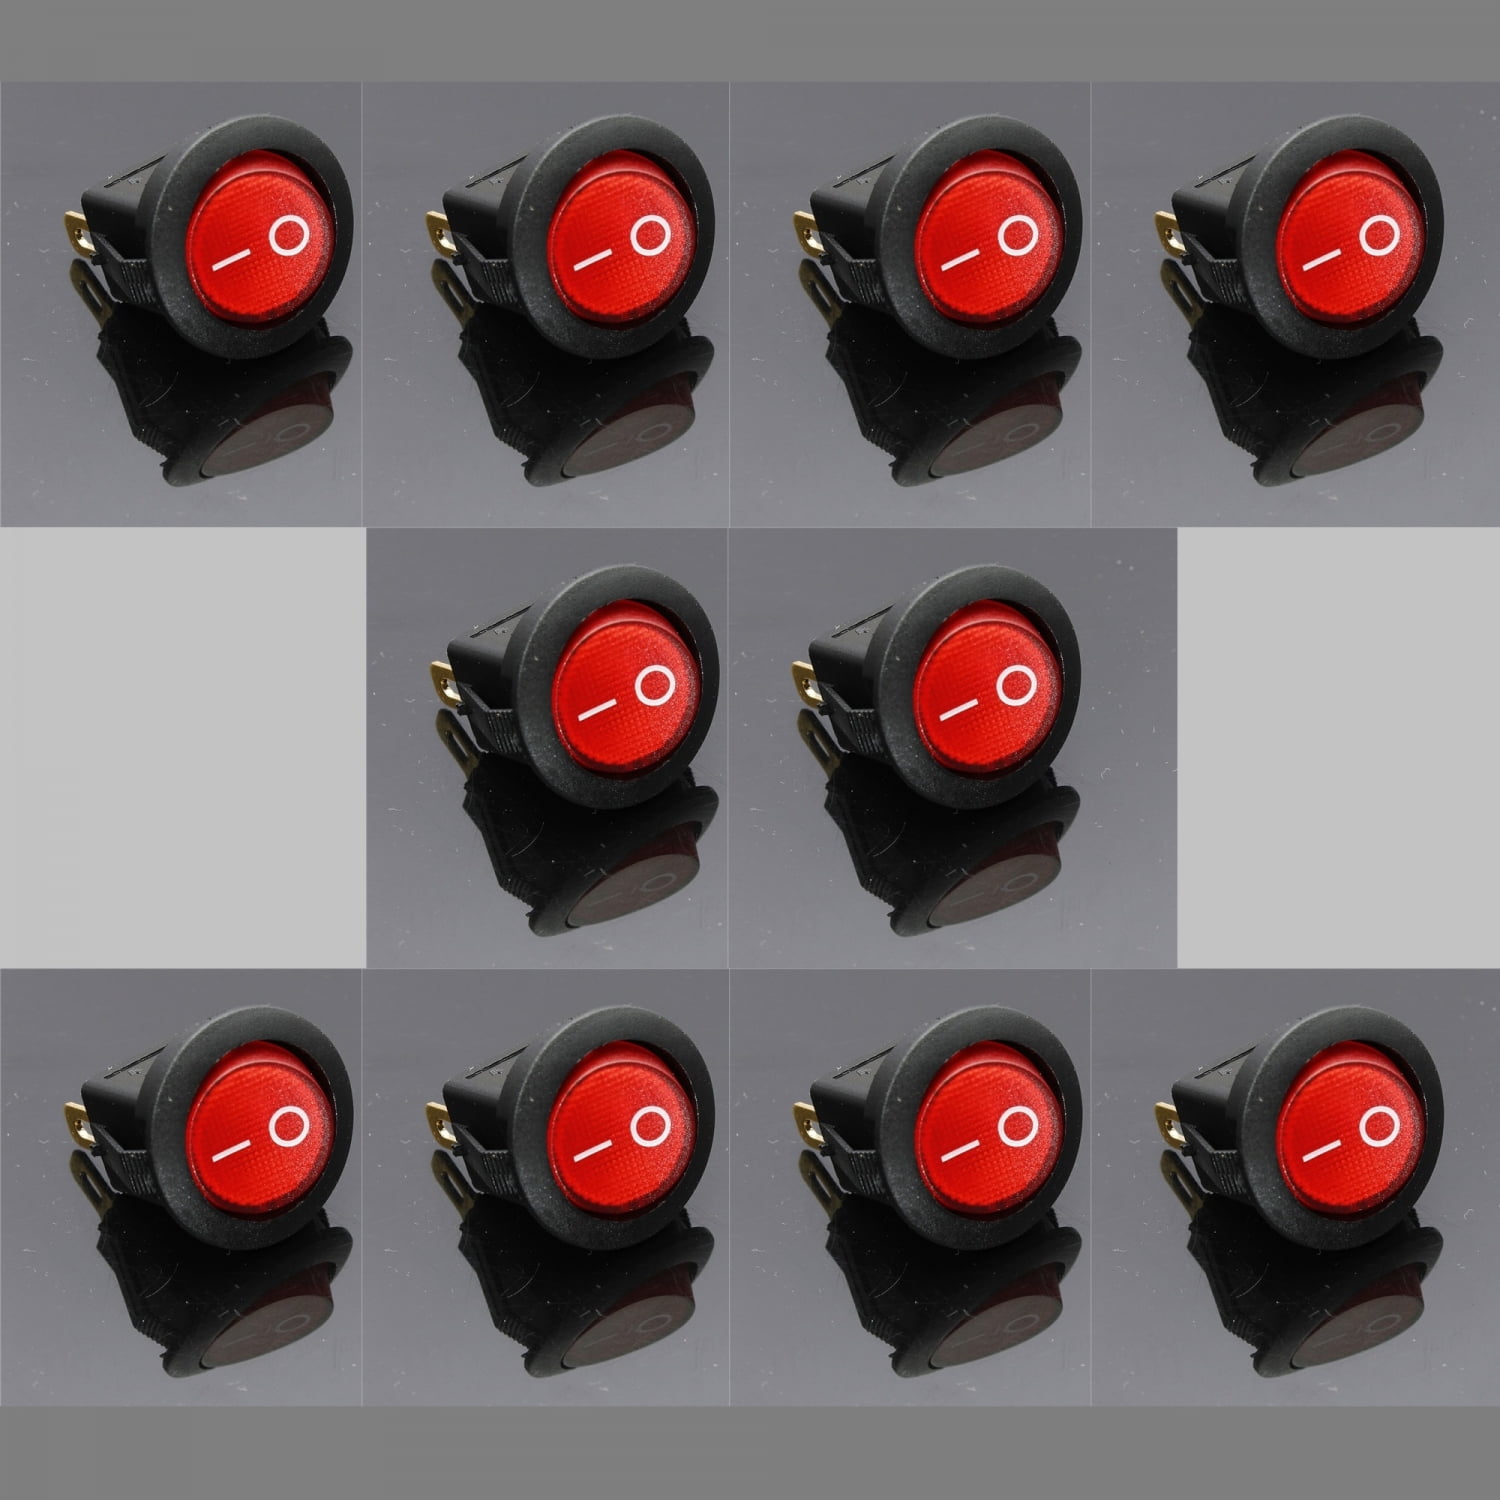 10X 12V 20A Car Truck Rocker Round Red Toggle LED Switch On-Off Control 